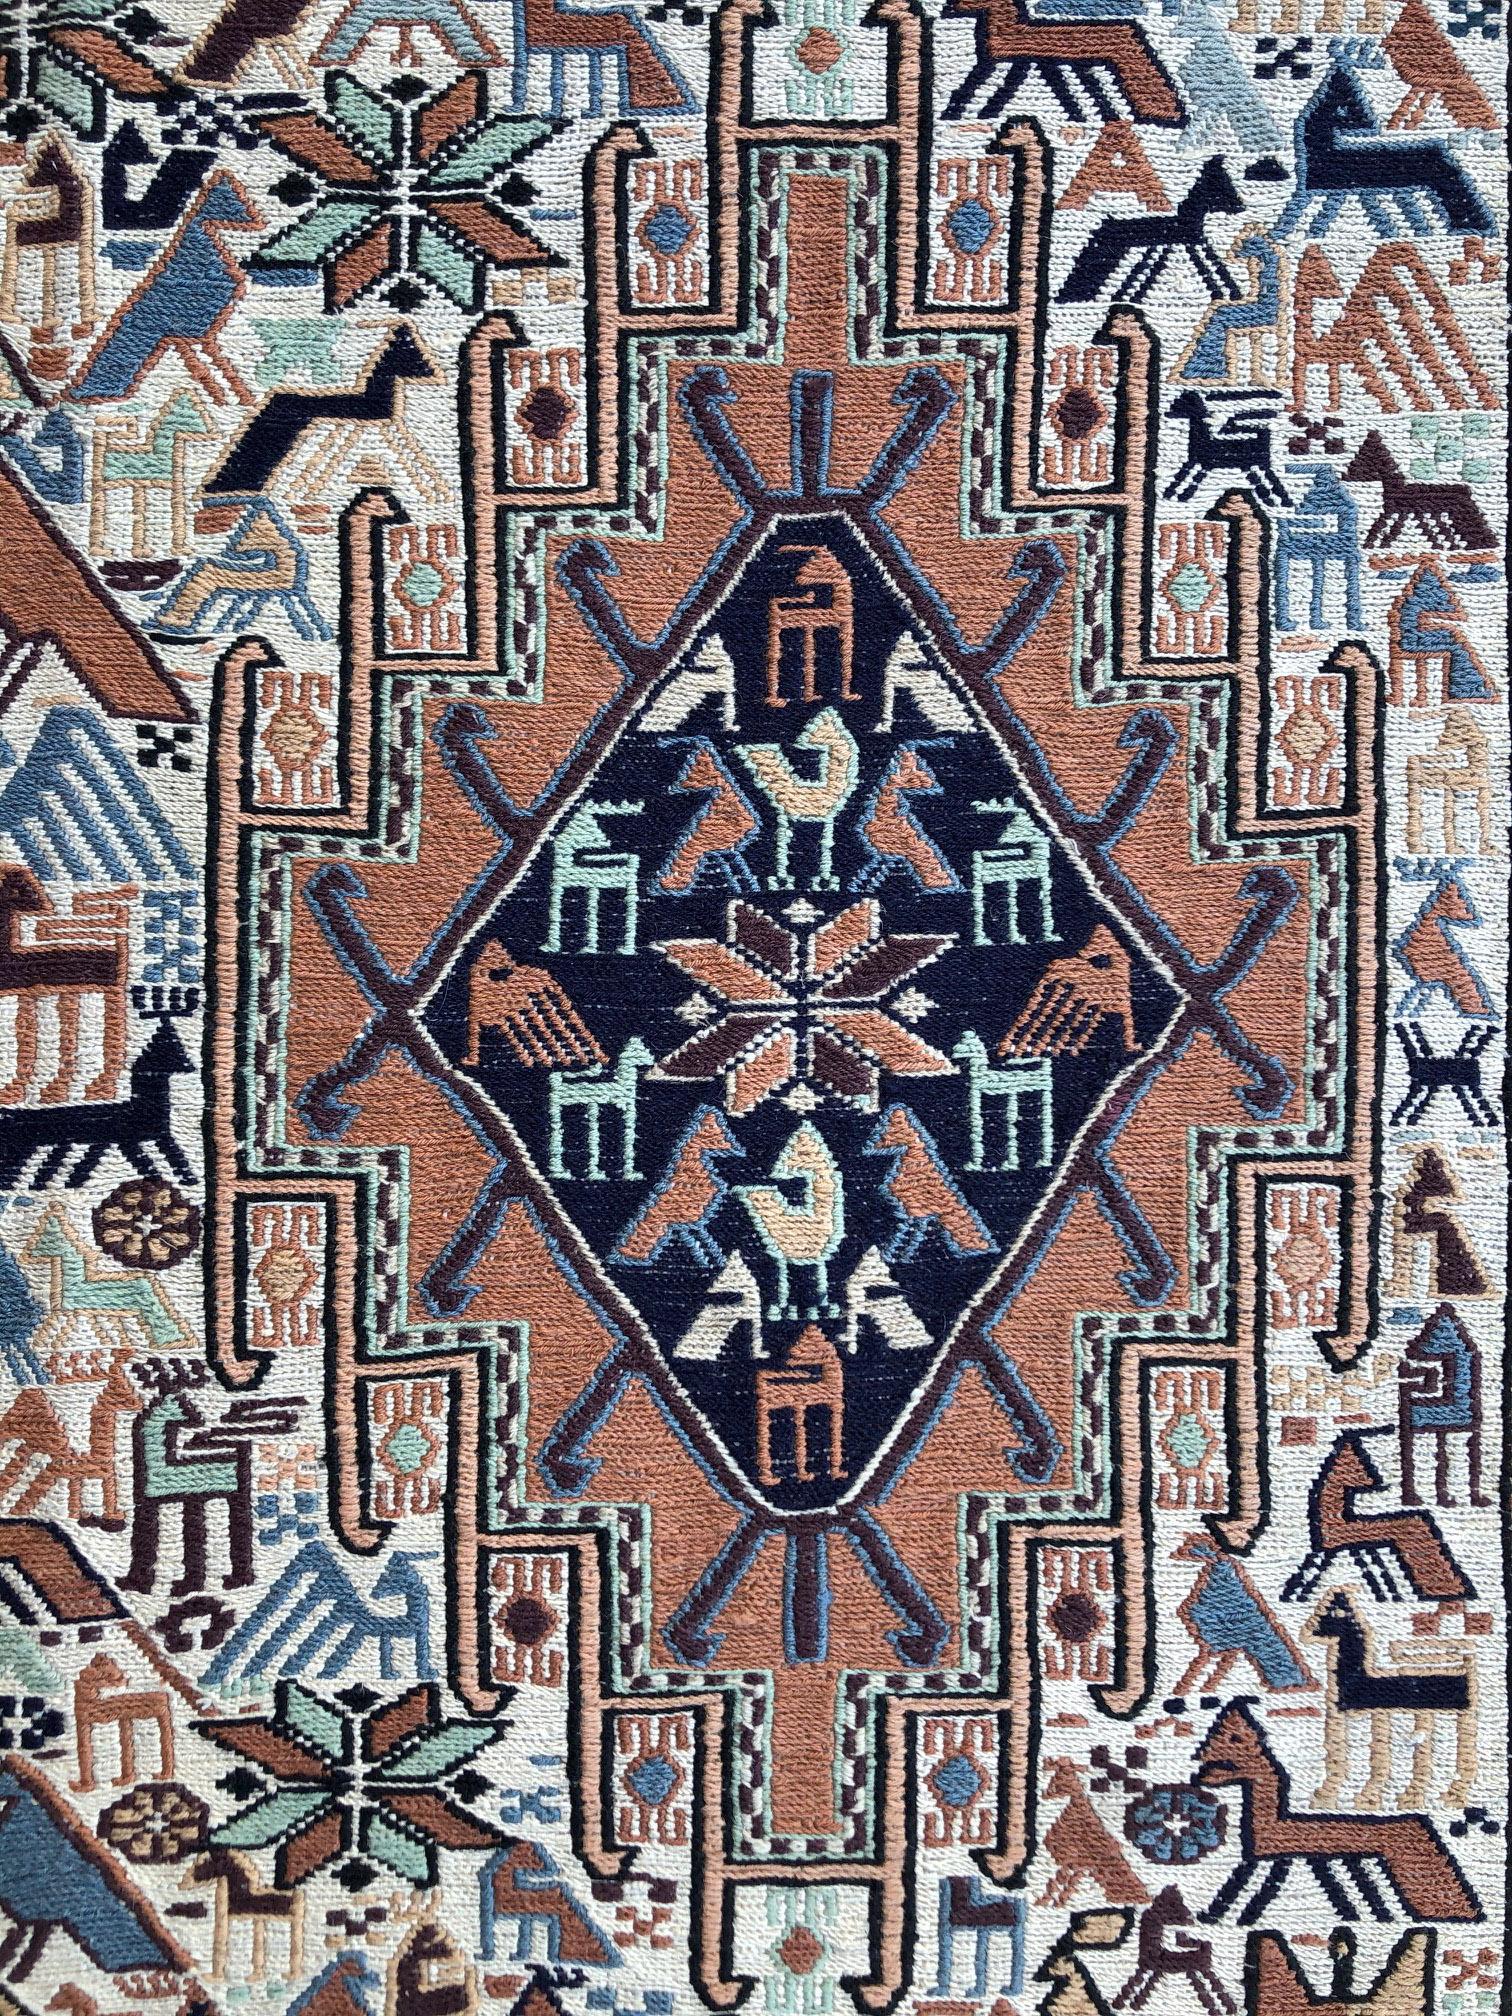 Persian Sumak Multi-Color Tribal Animal Motif Kilim Rug In New Condition For Sale In San Diego, CA